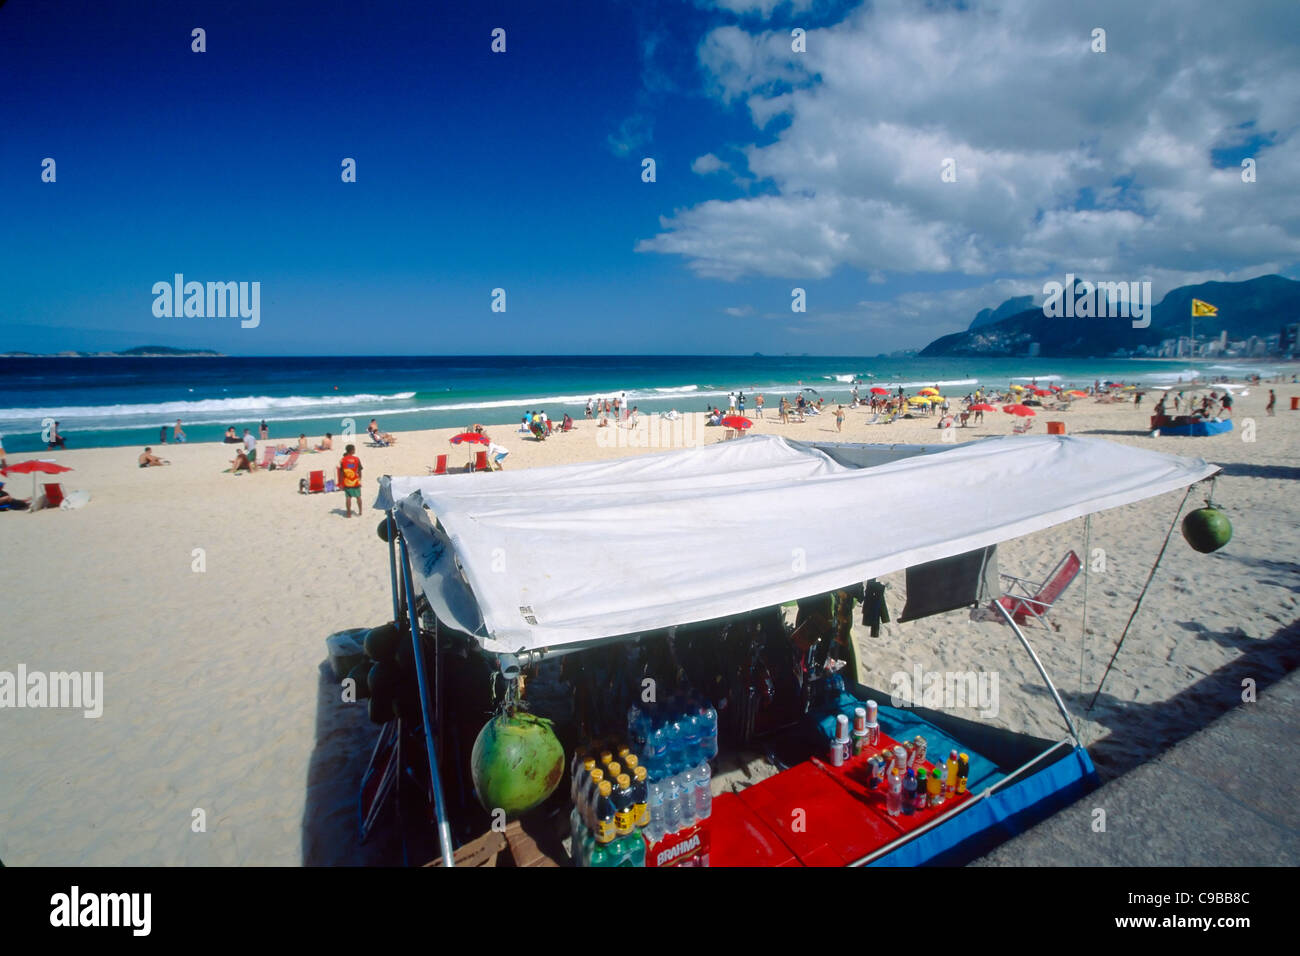 Food and Drink fro sale from a Tent, Ipanema Beach, Rio de Janeiro, Brazil Stock Photo